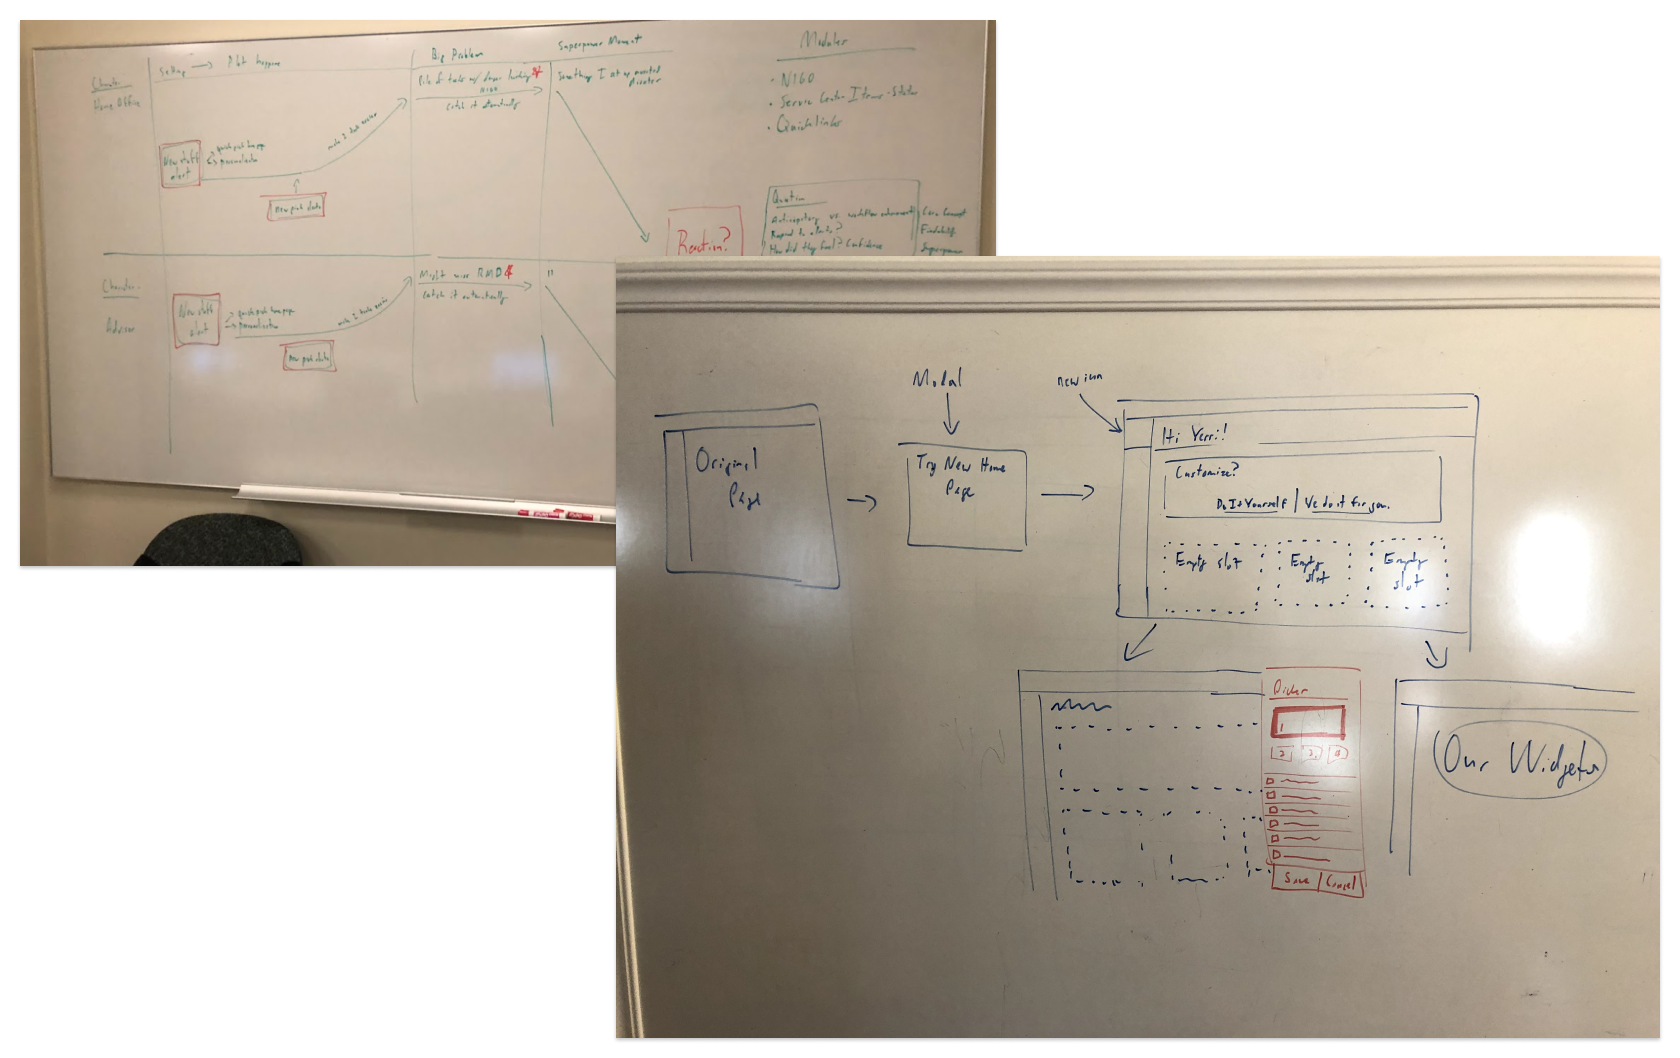 Images of whiteboard drawings for the initial story/flow, and a rough idea of the prototype interaction.